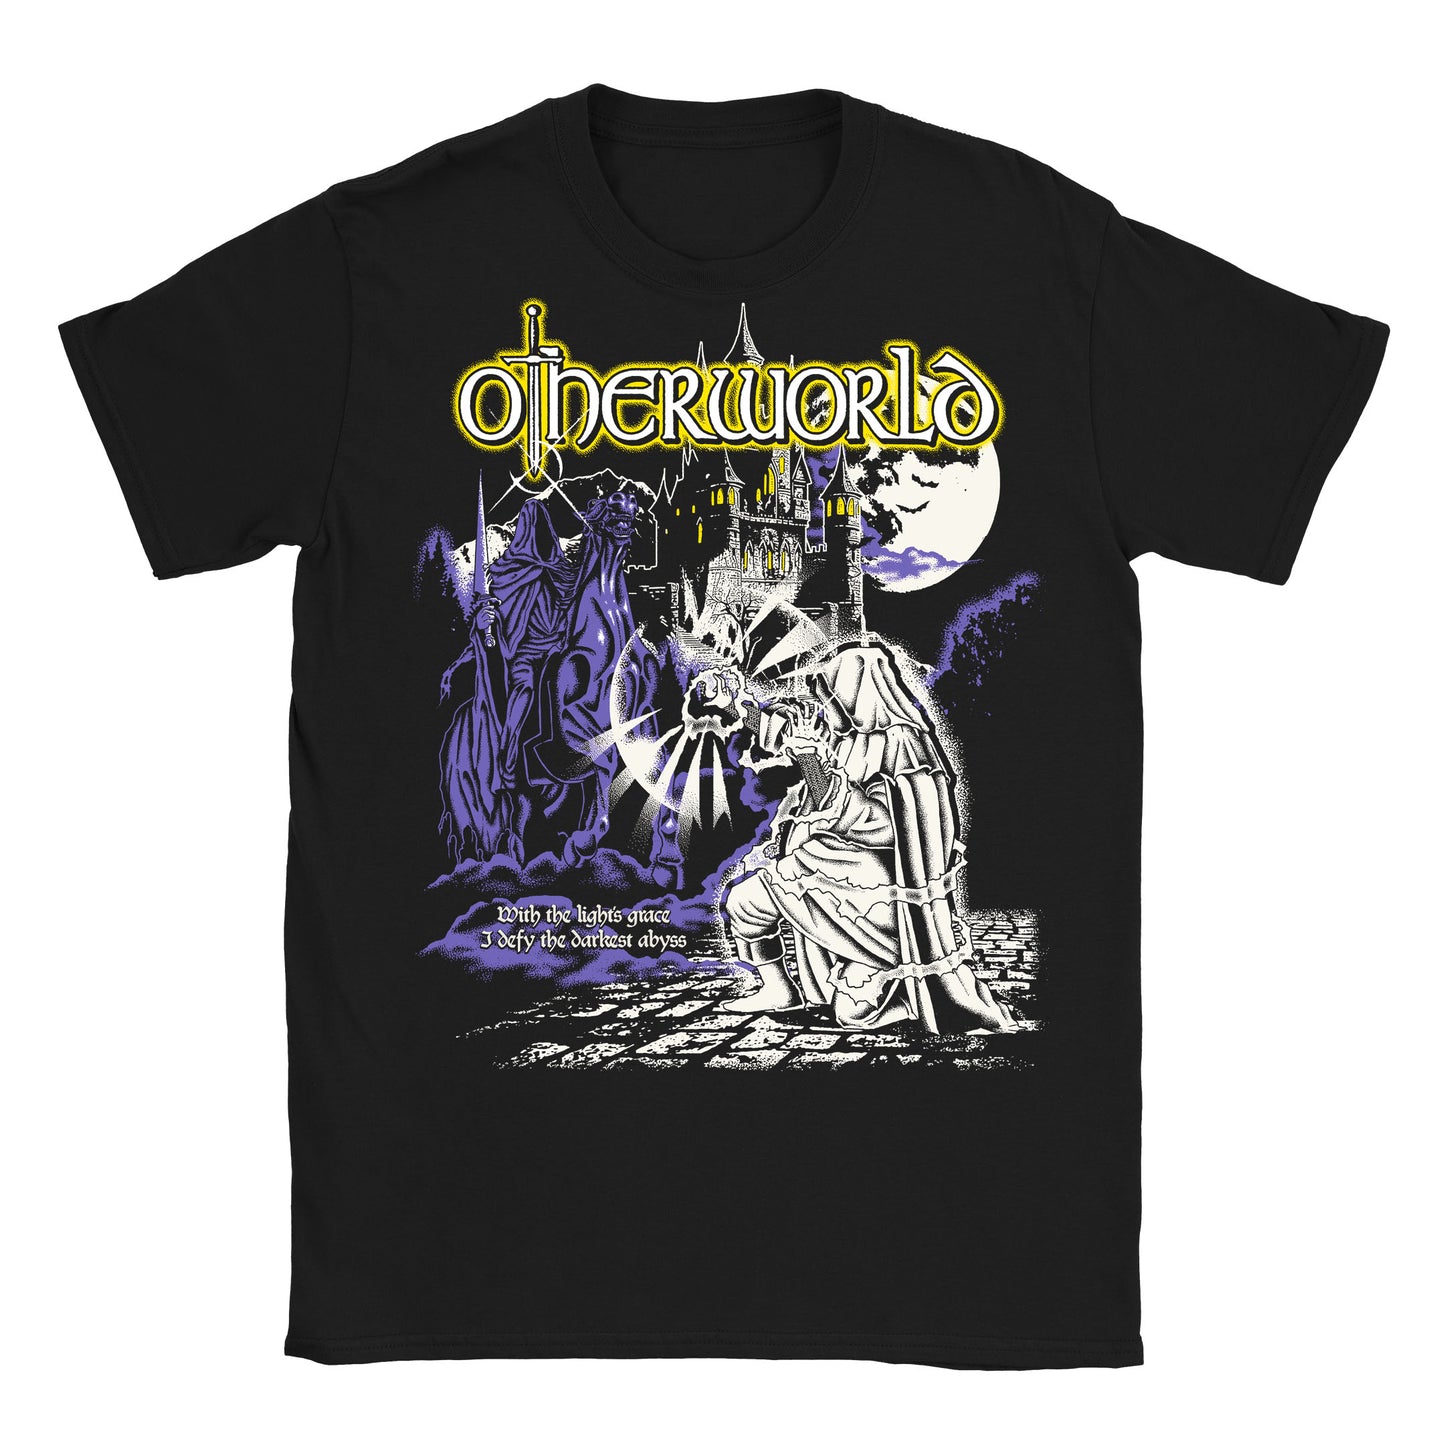 Otherworld "With The Light's Grace" Shirt